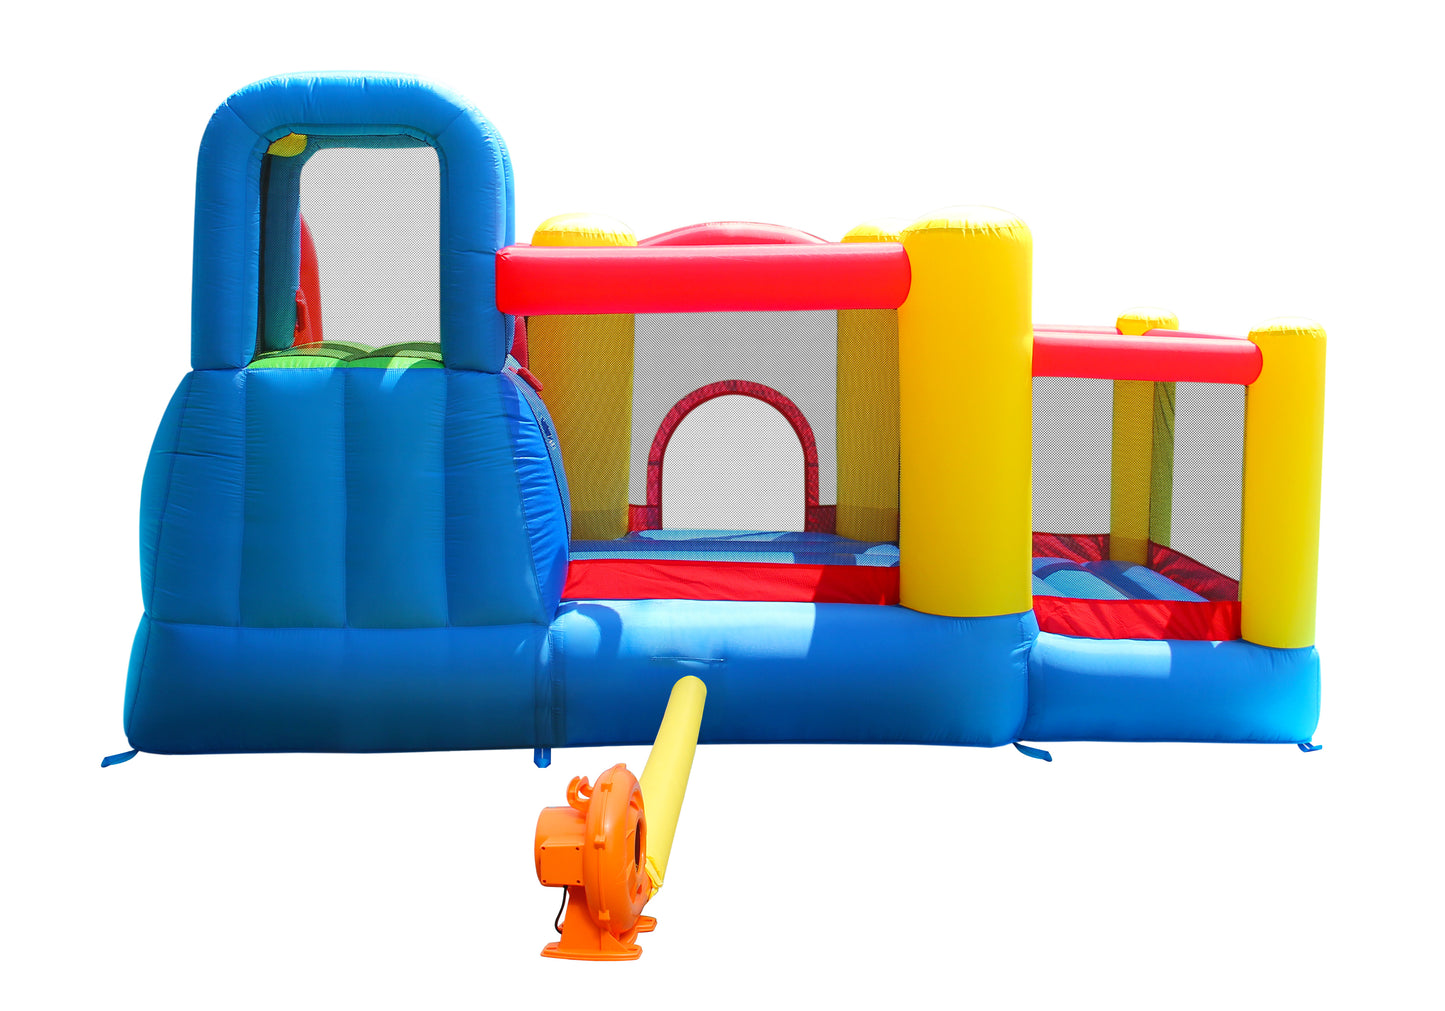 5 in 1 Play Centre